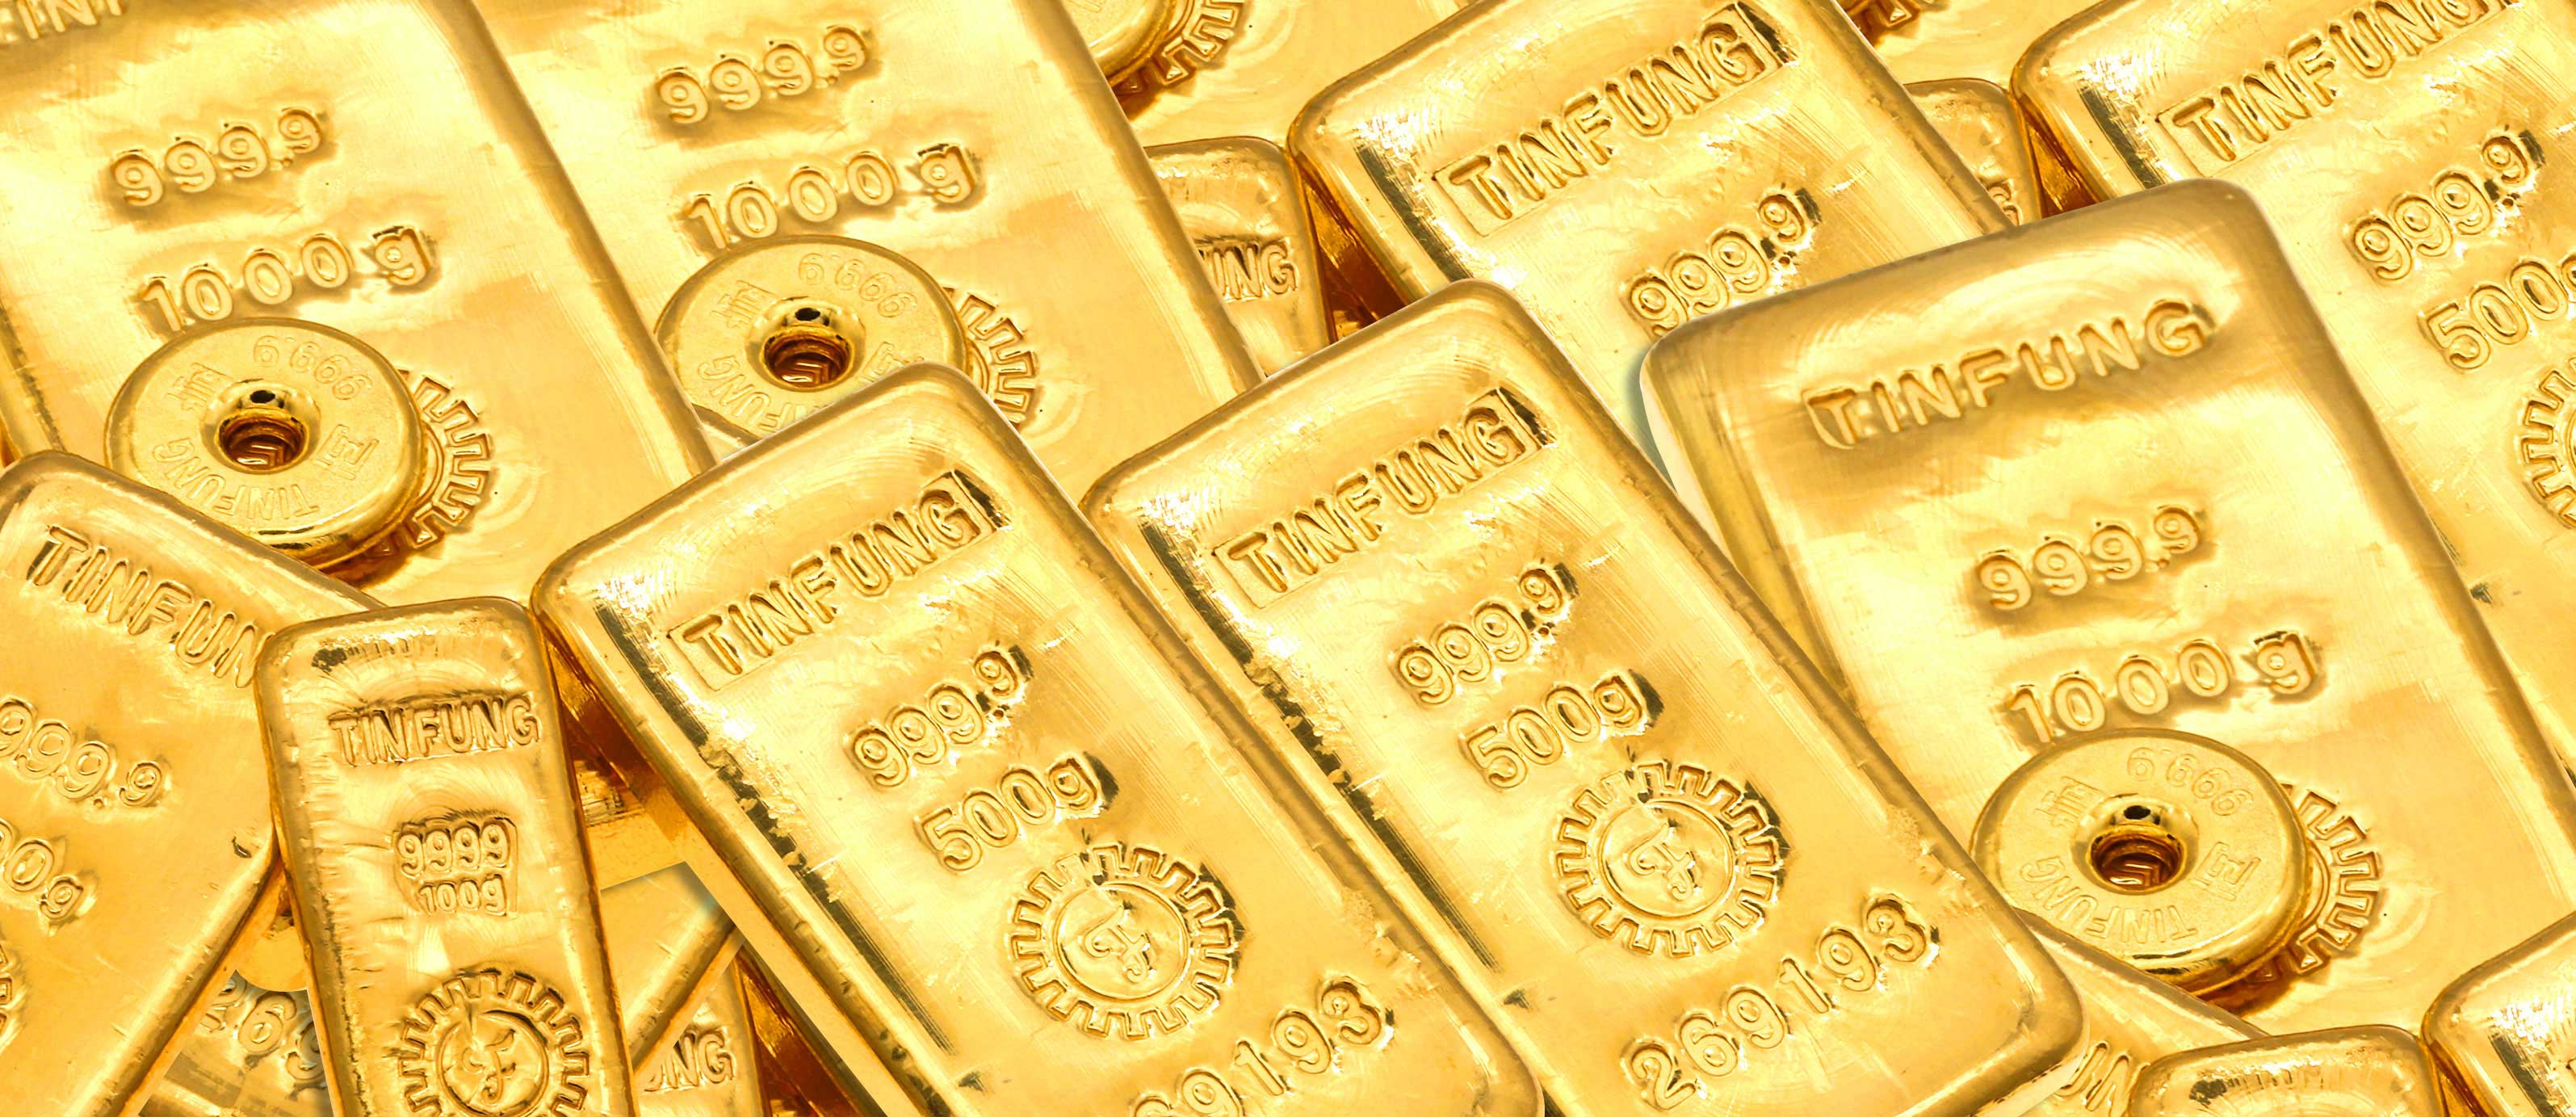 The overview of the global gold market